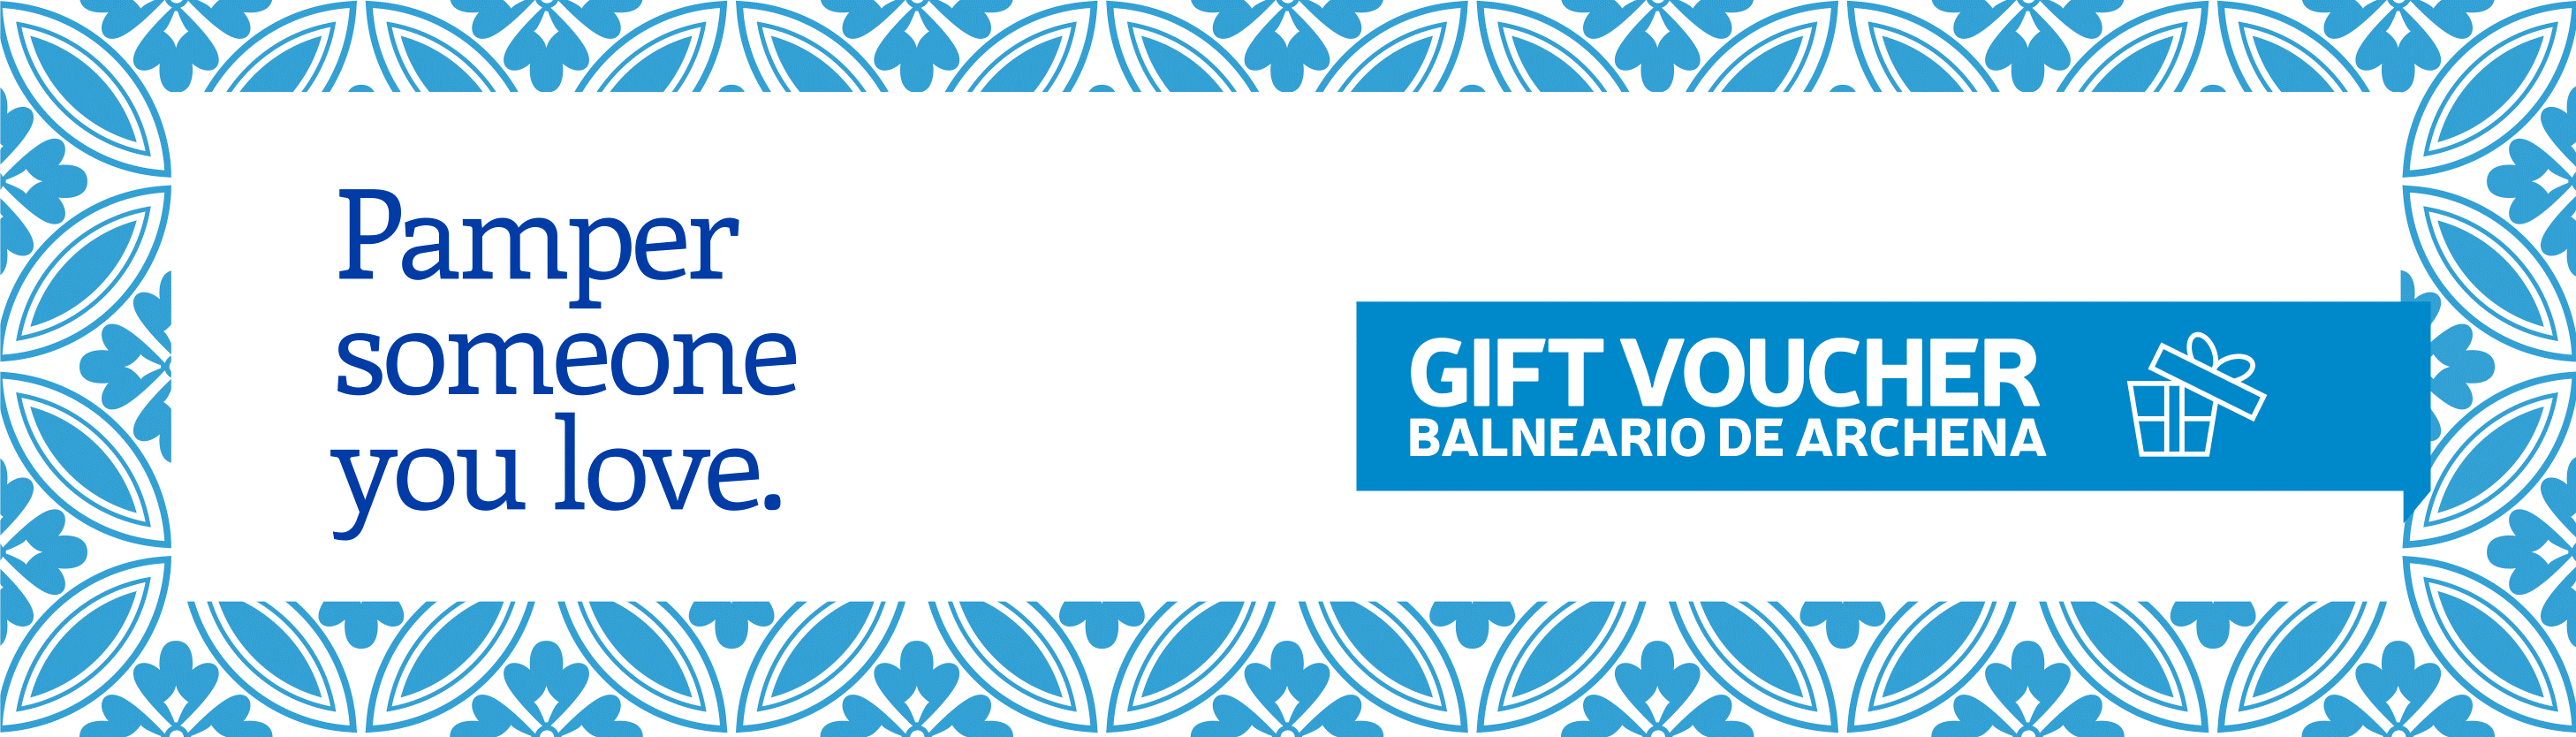 Treat a loved one to some much needed relaxation with a Balneario de Archena gift voucher